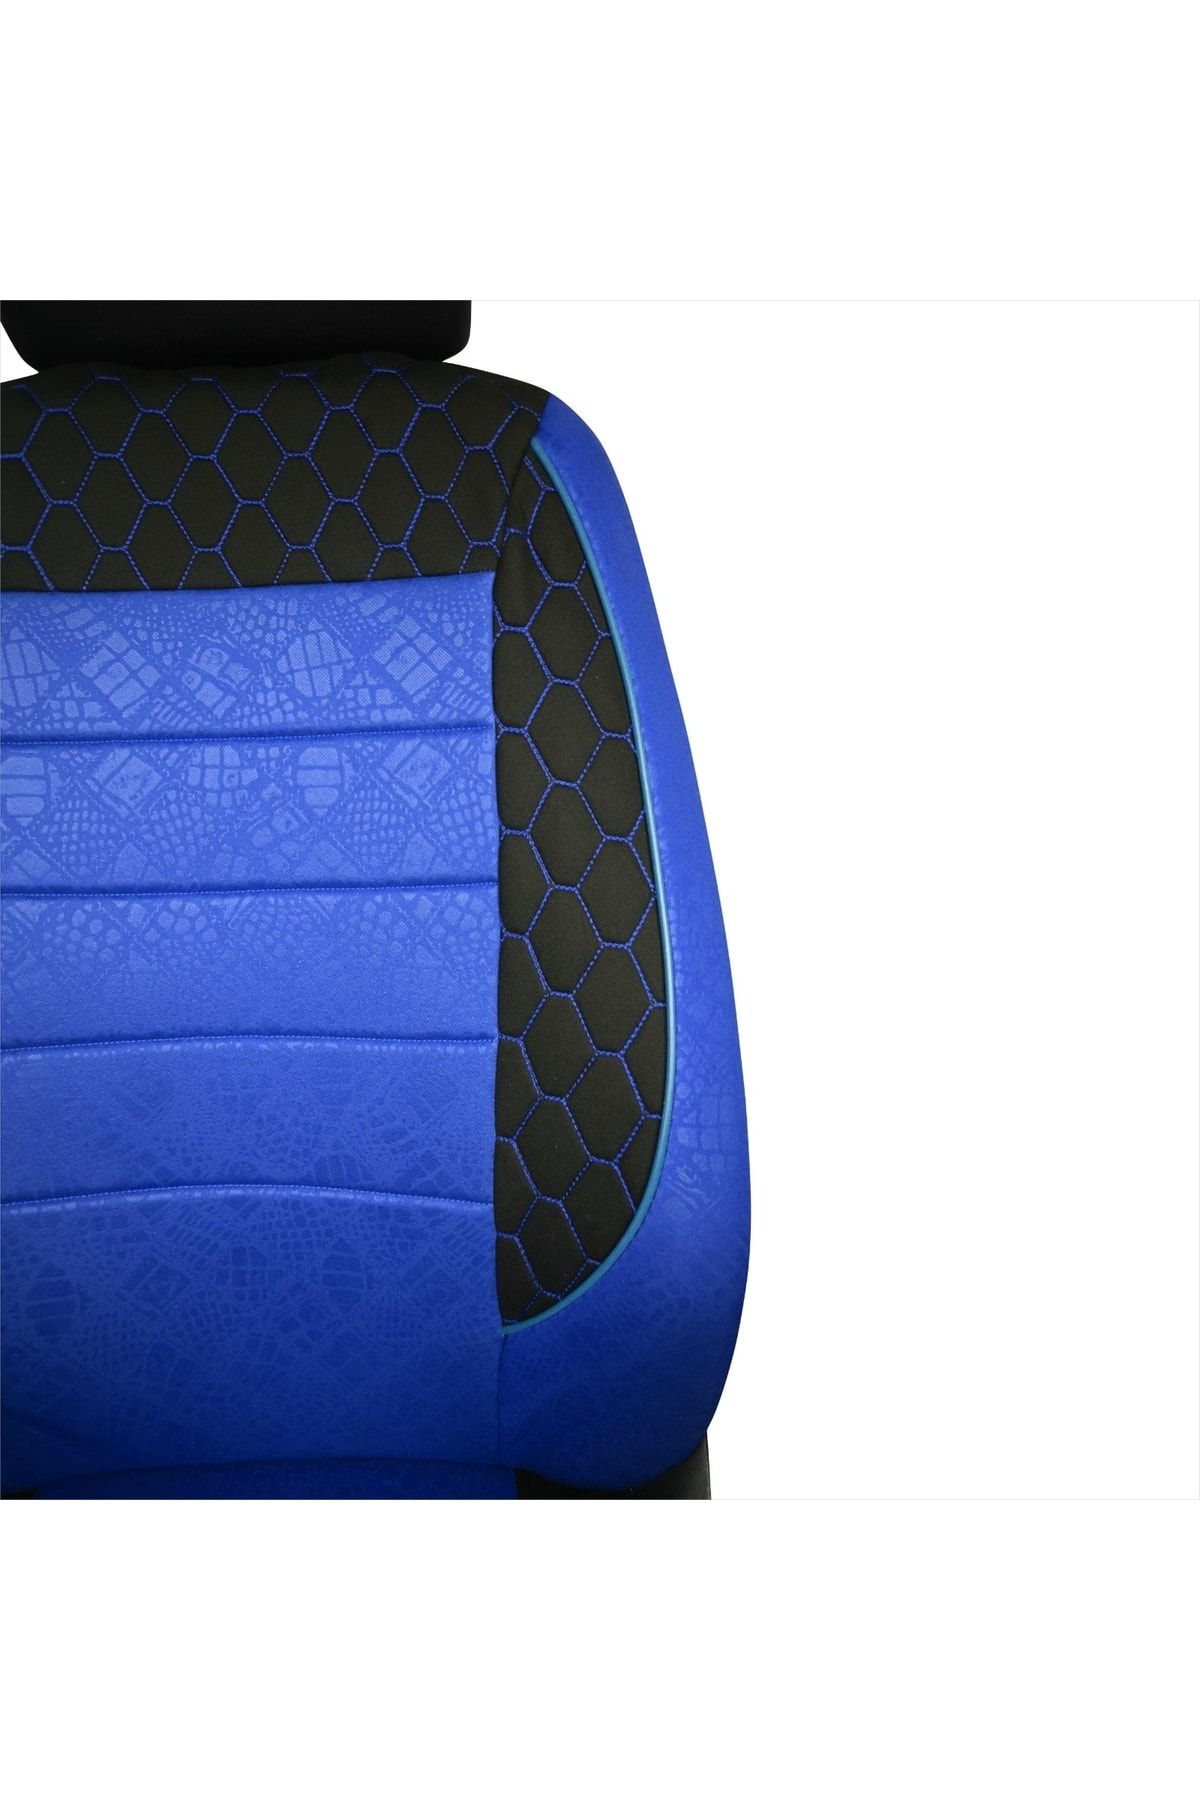 SMRAUTOACCESSORY Blue Car Accessories Styles, Prices - Trendyol